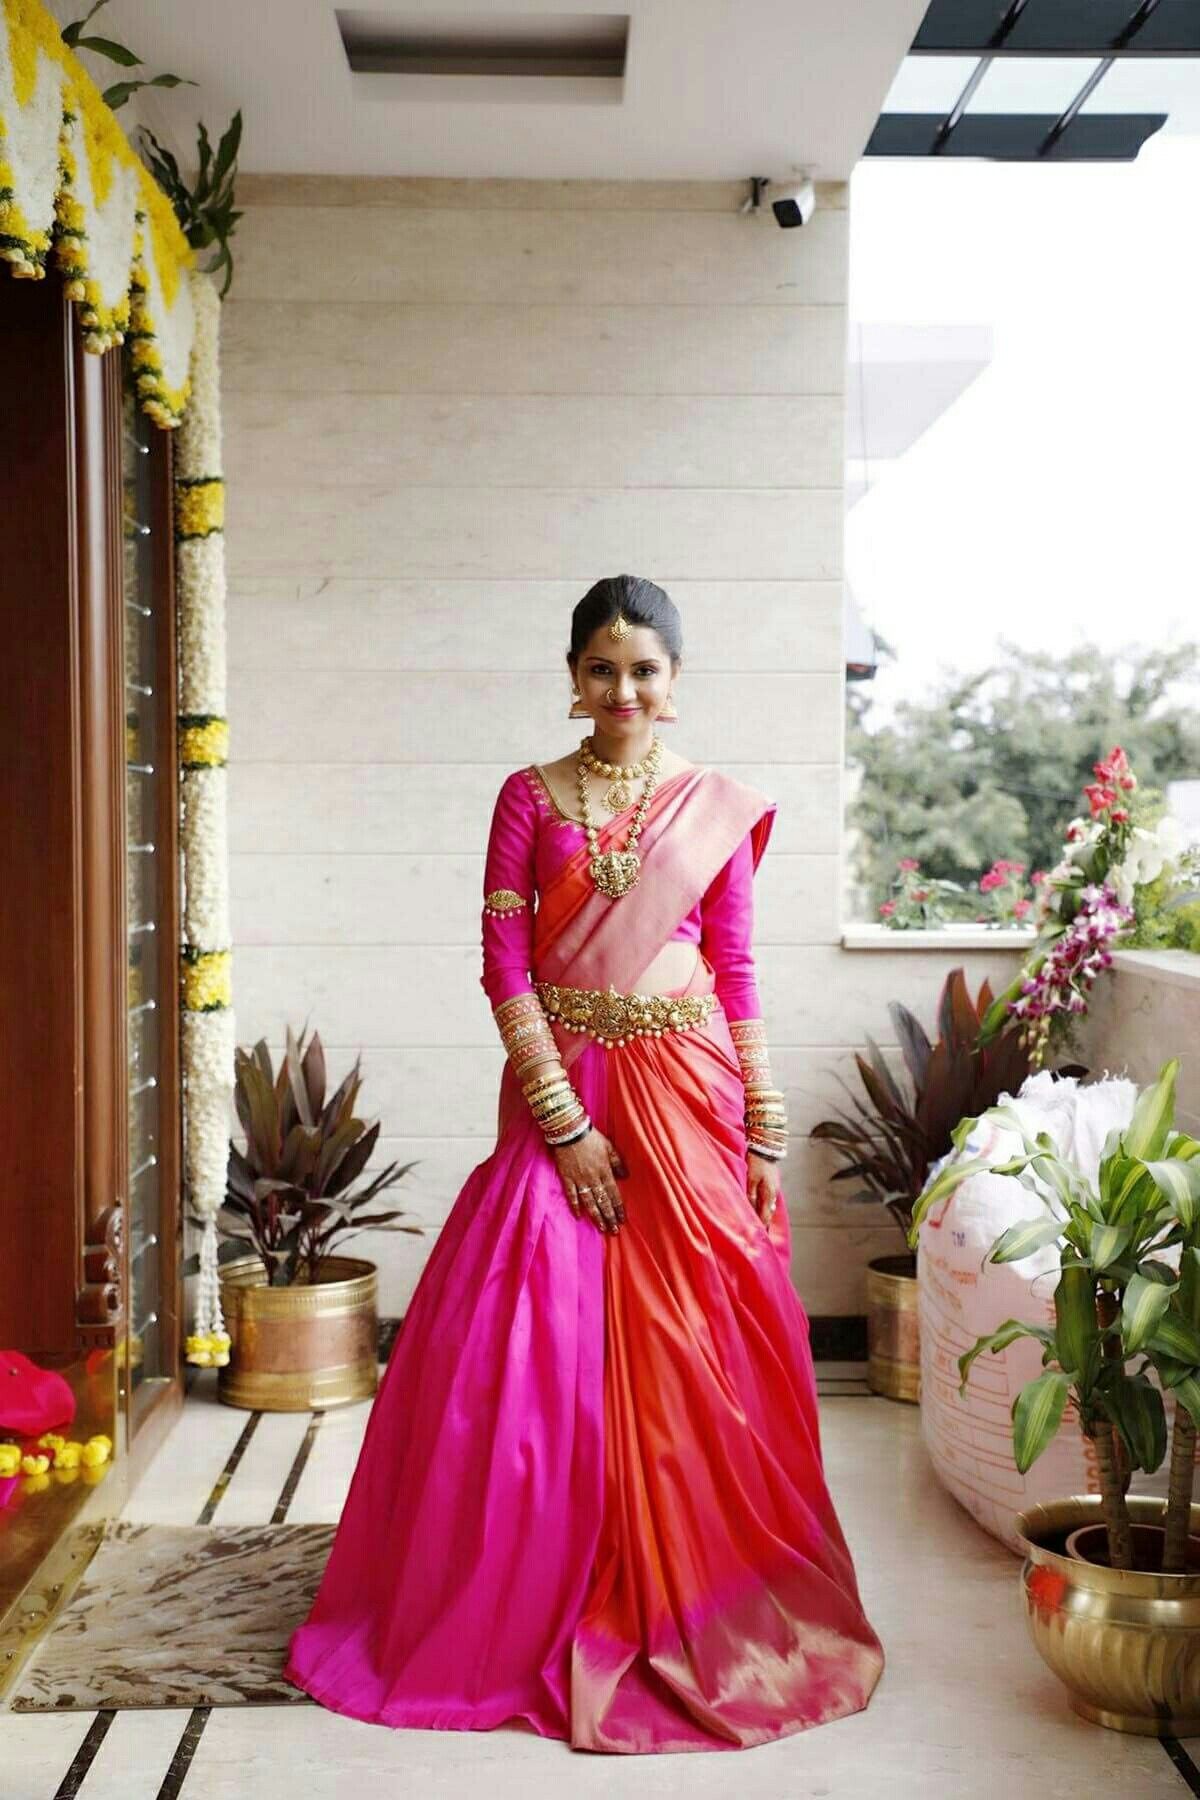 How to wear / style a saree